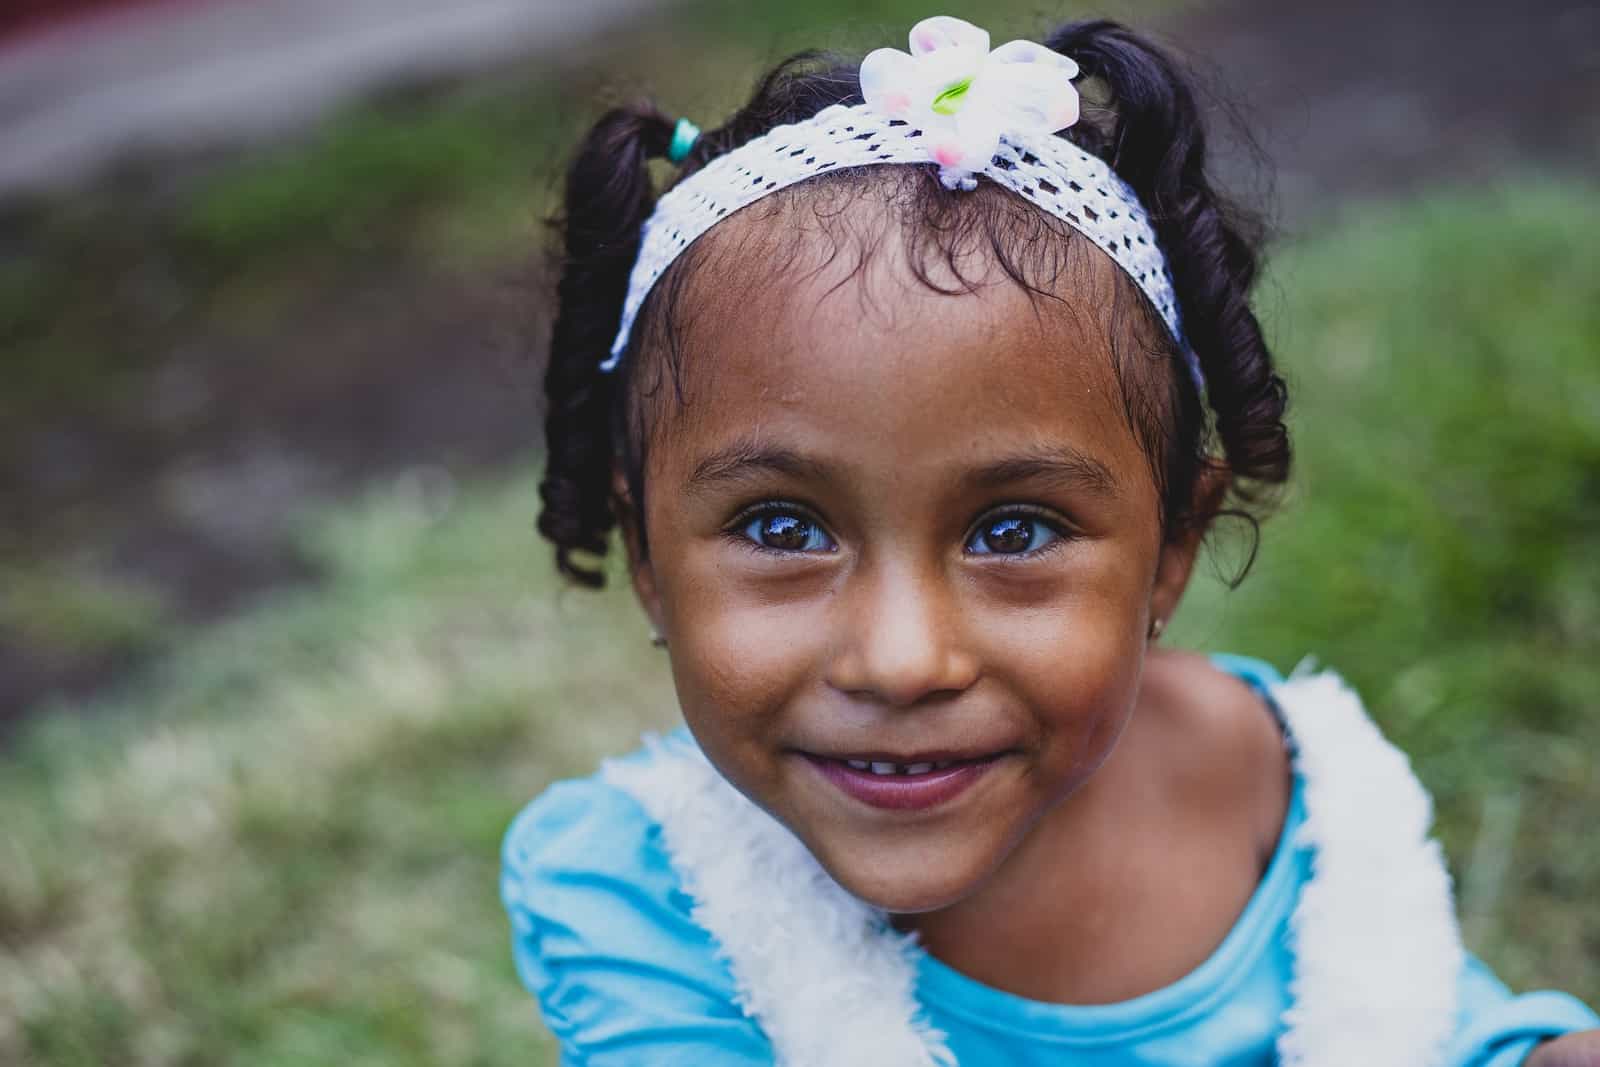 A girl in a blue shirt and white headband with a flower on it looks up into the camera. 